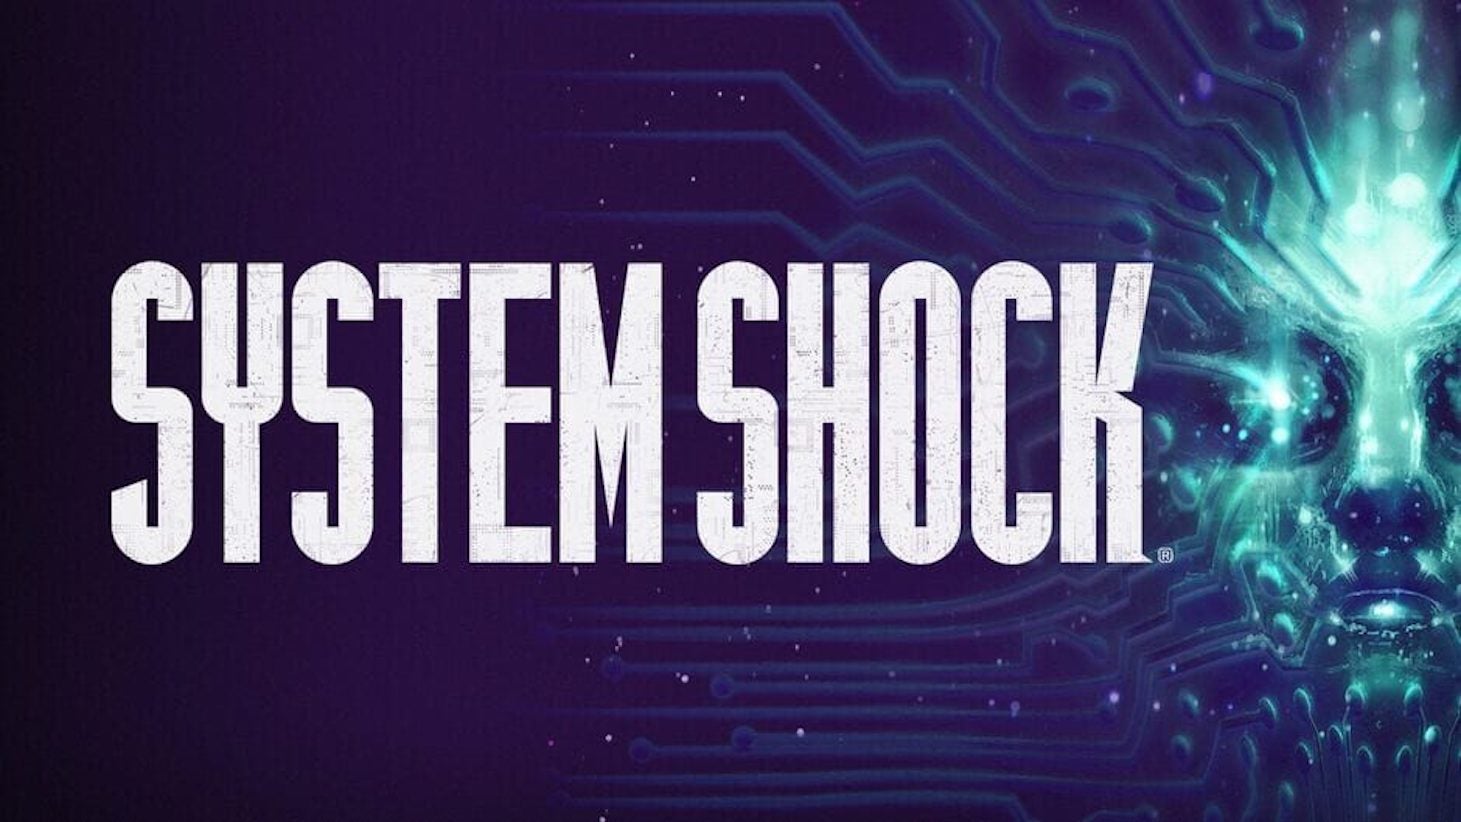 Image for "Dismemberment has been a high priority" for System Shock remake